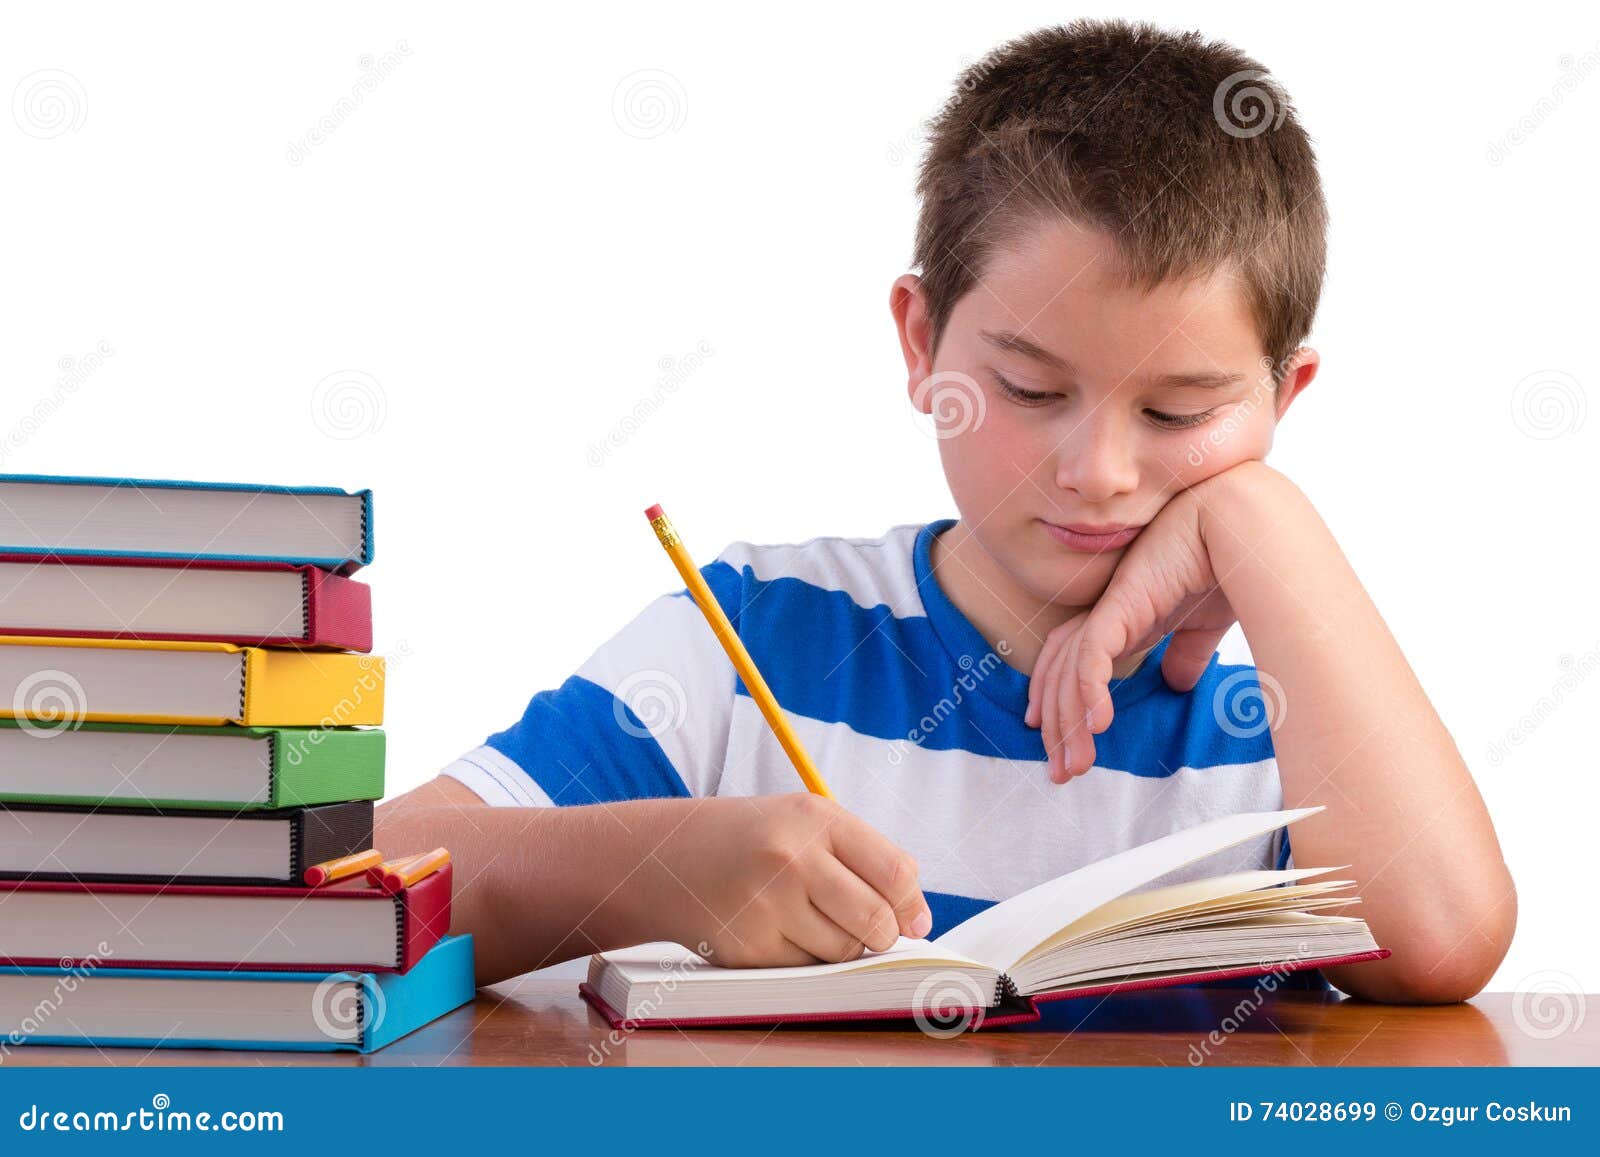 young dedicated middle school male kid studying